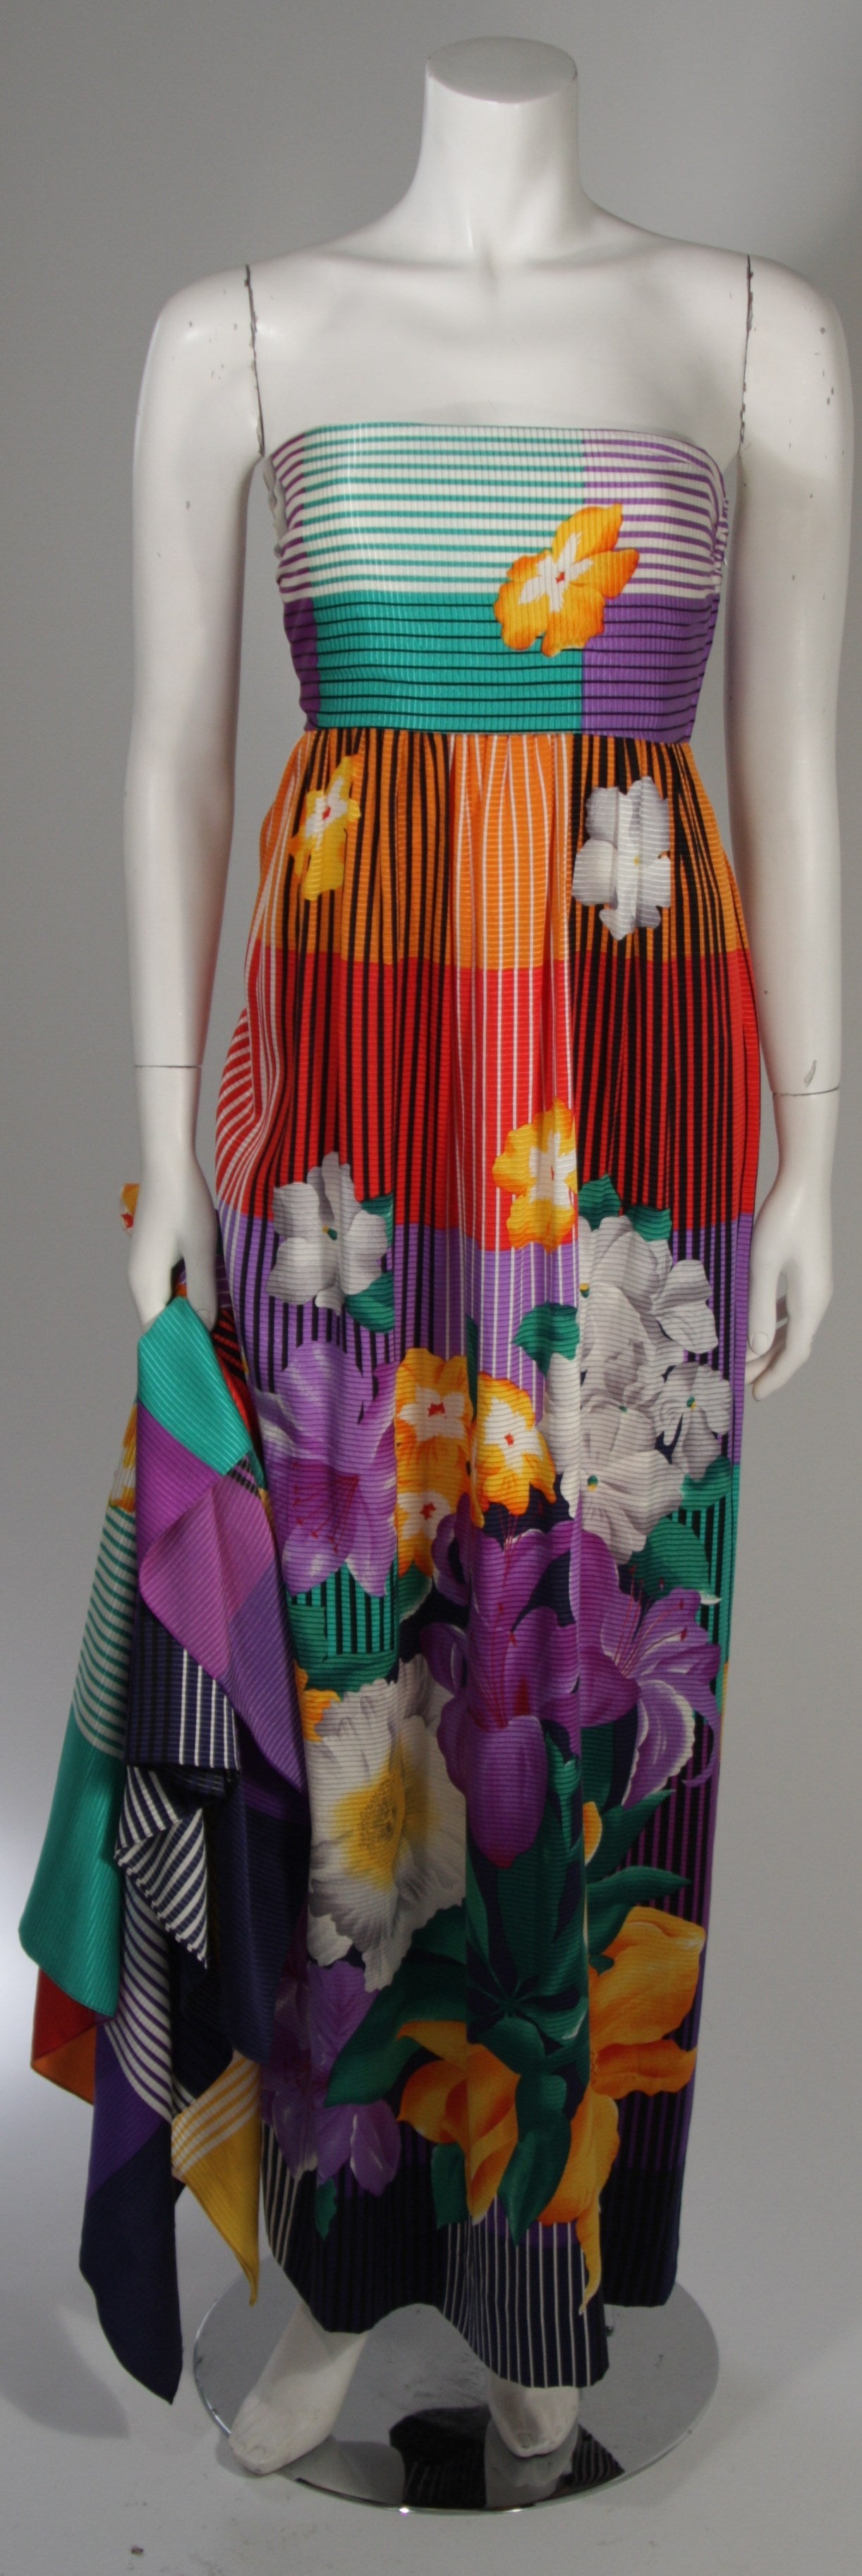 This Helga gown is composed of a vibrant silk with floral print and is accompanied by a large shawl. There is a side zipper closure. Beautiful and vibrant print. In excellent condition.

Measures (Approximately)
Marked Size 8
Length: 51